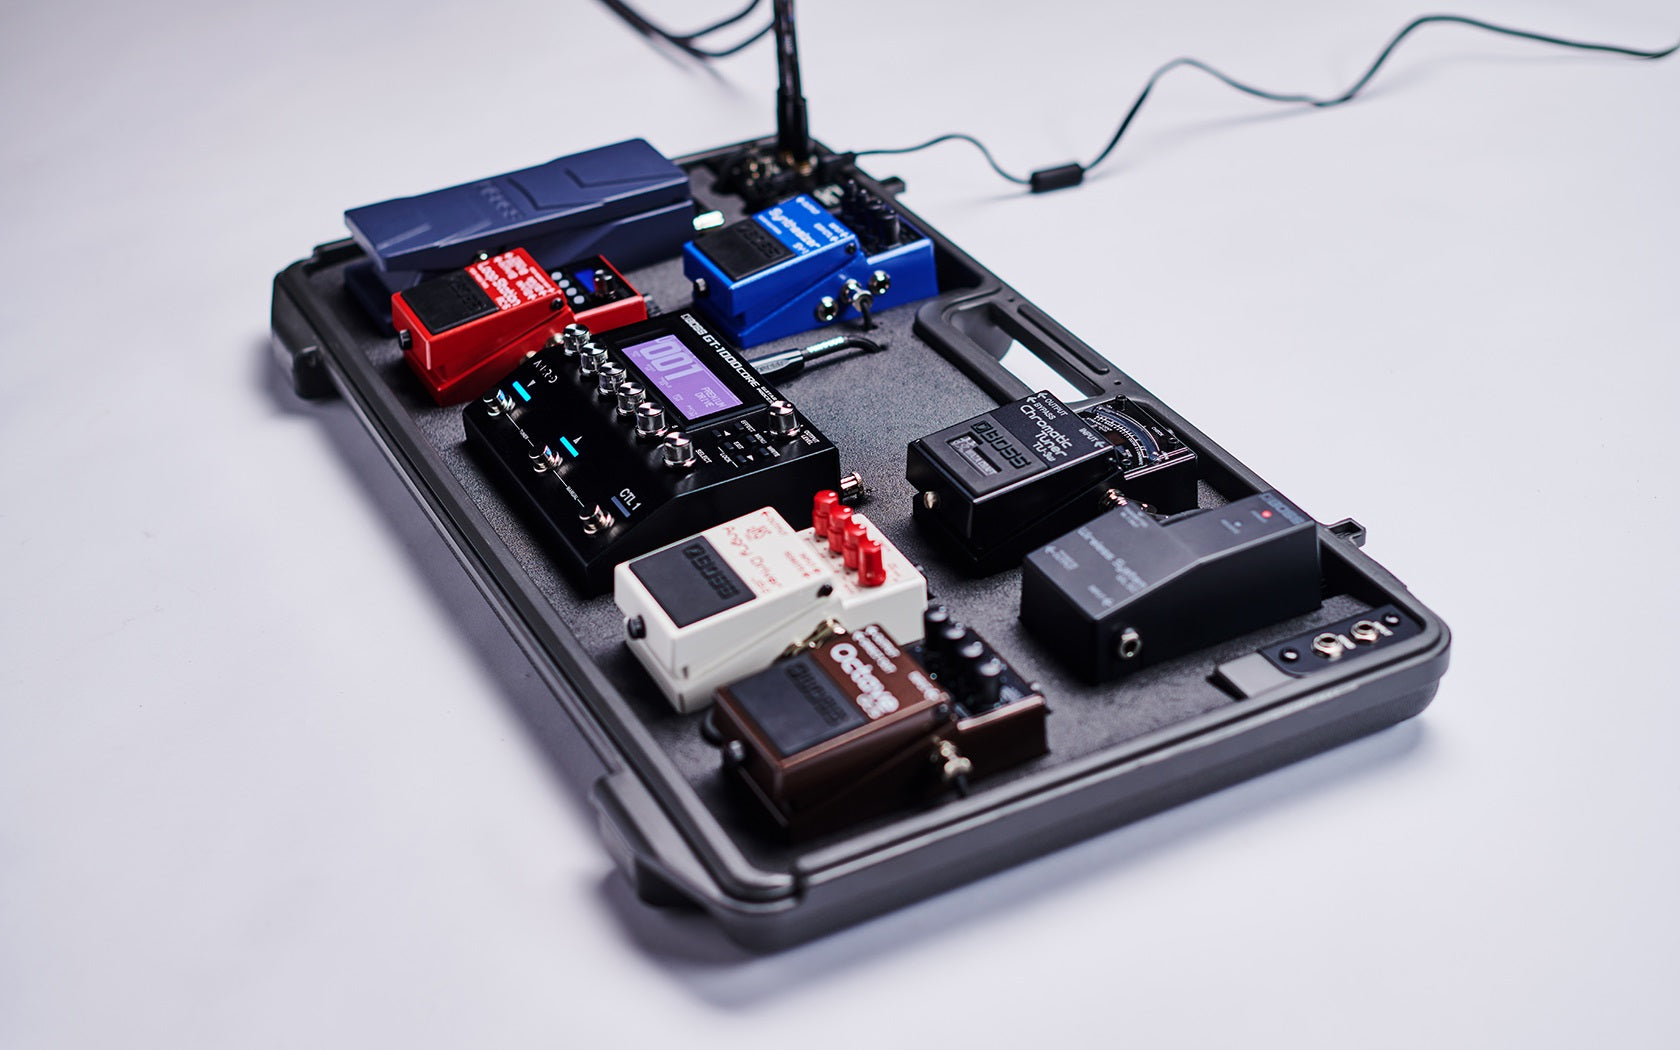 Boss BCB-90X Pedal Board with Power Supply, Holding Pad, Daisy Chain Power Cable